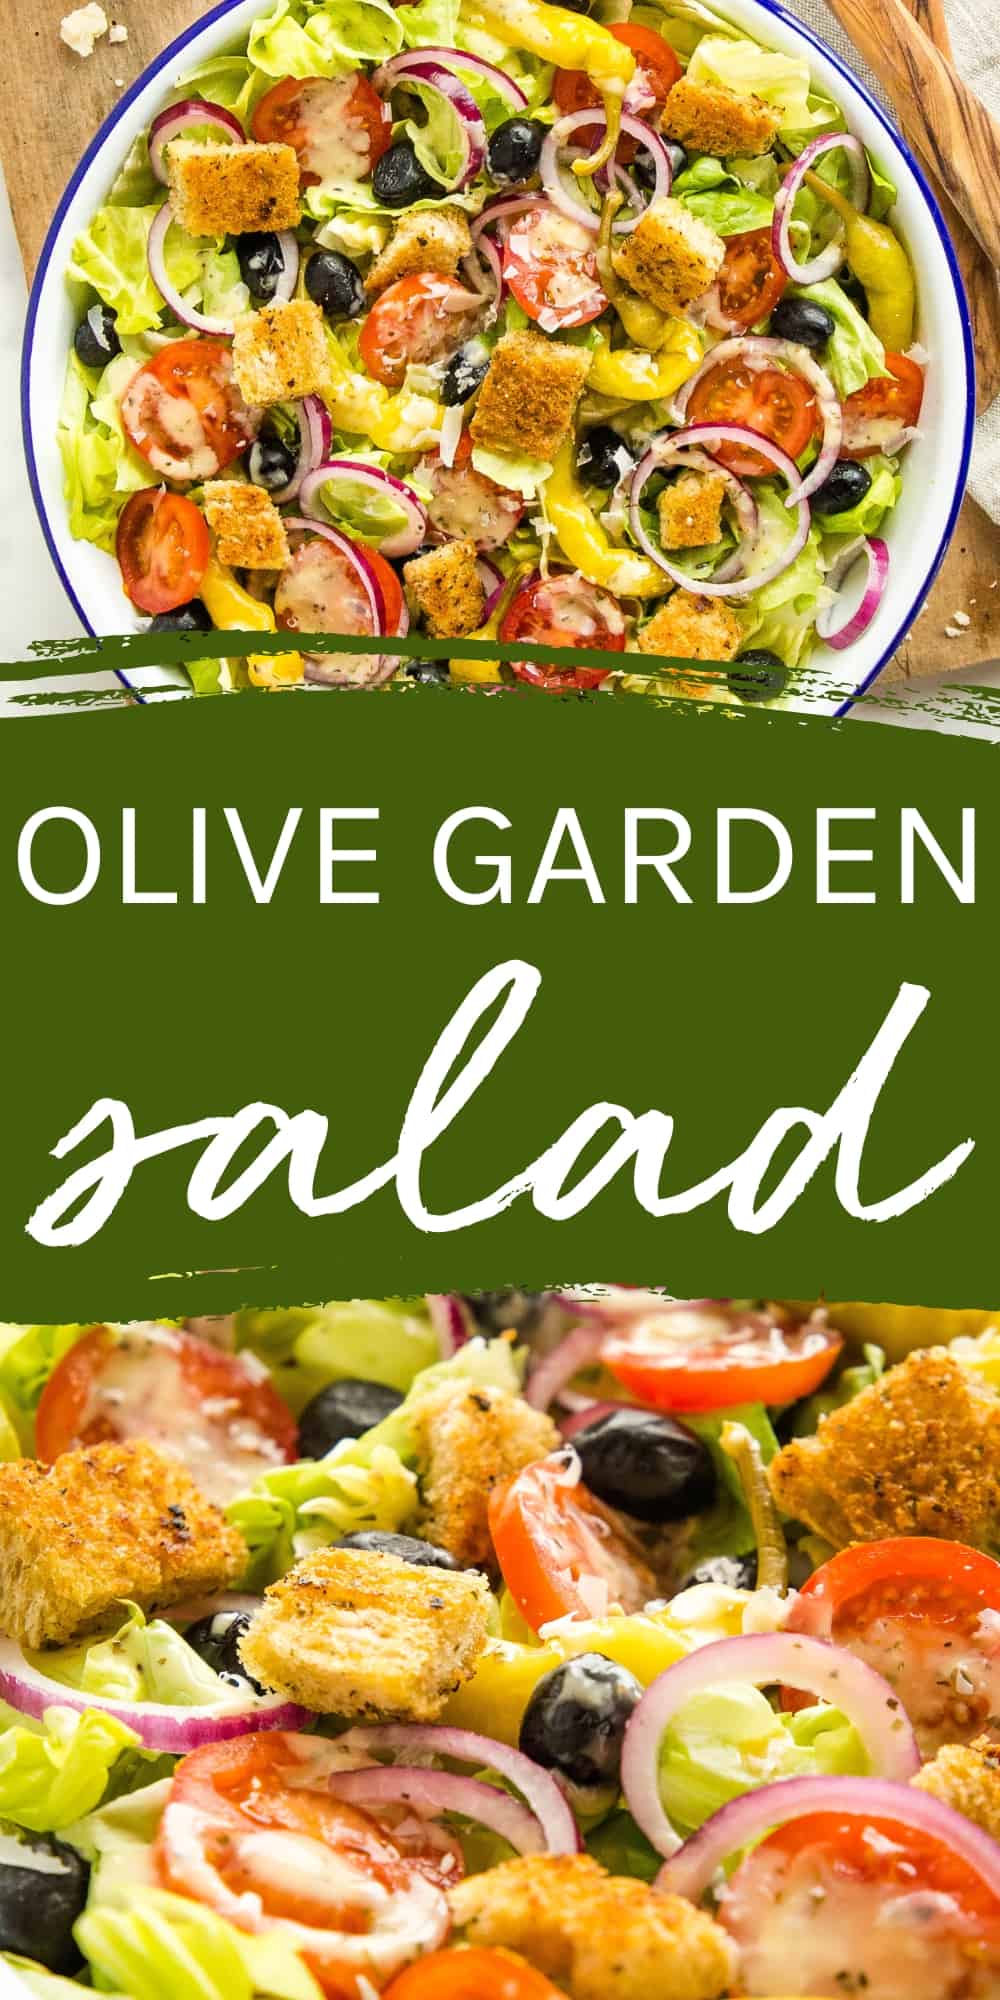 This Olive Garden Salad recipe is exactly like the restaurant house salad - tender greens, Roma tomatoes, red onions, olives, whole pepperoncini peppers, croutons and a classic creamy Italian salad dressing, all topped with freshly shaved Parmesan cheese! Recipe from thebusybaker.ca! #olivegardensalad #olivegardencopycat #olivegardenrestaurant #italiansalad #italian #saladrecipe #bestsaladrecipe #easysalad #healthy #copycat via @busybakerblog